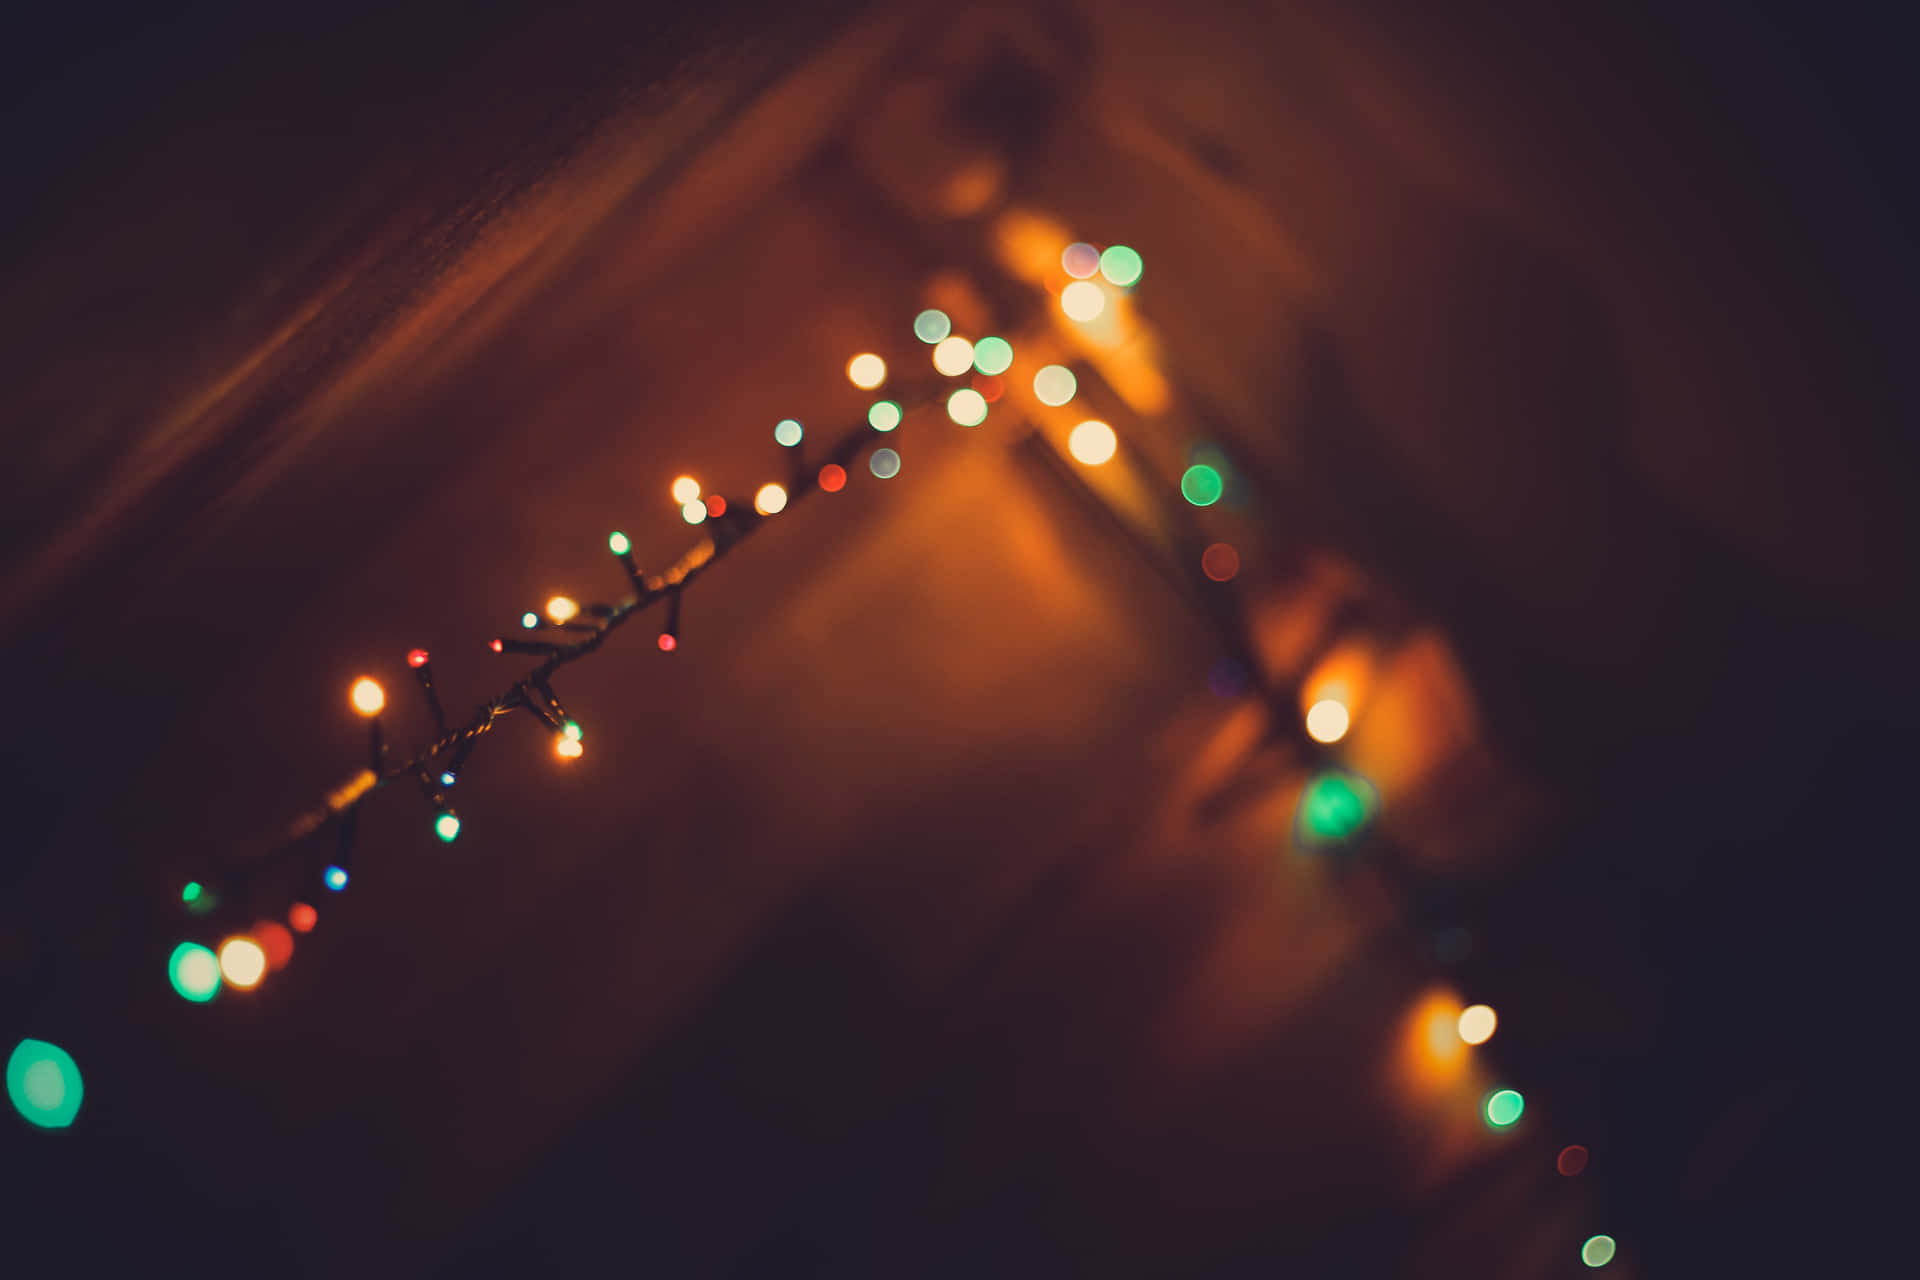 Holiday magic - Illuminate your house this winter with festive Christmas lights.